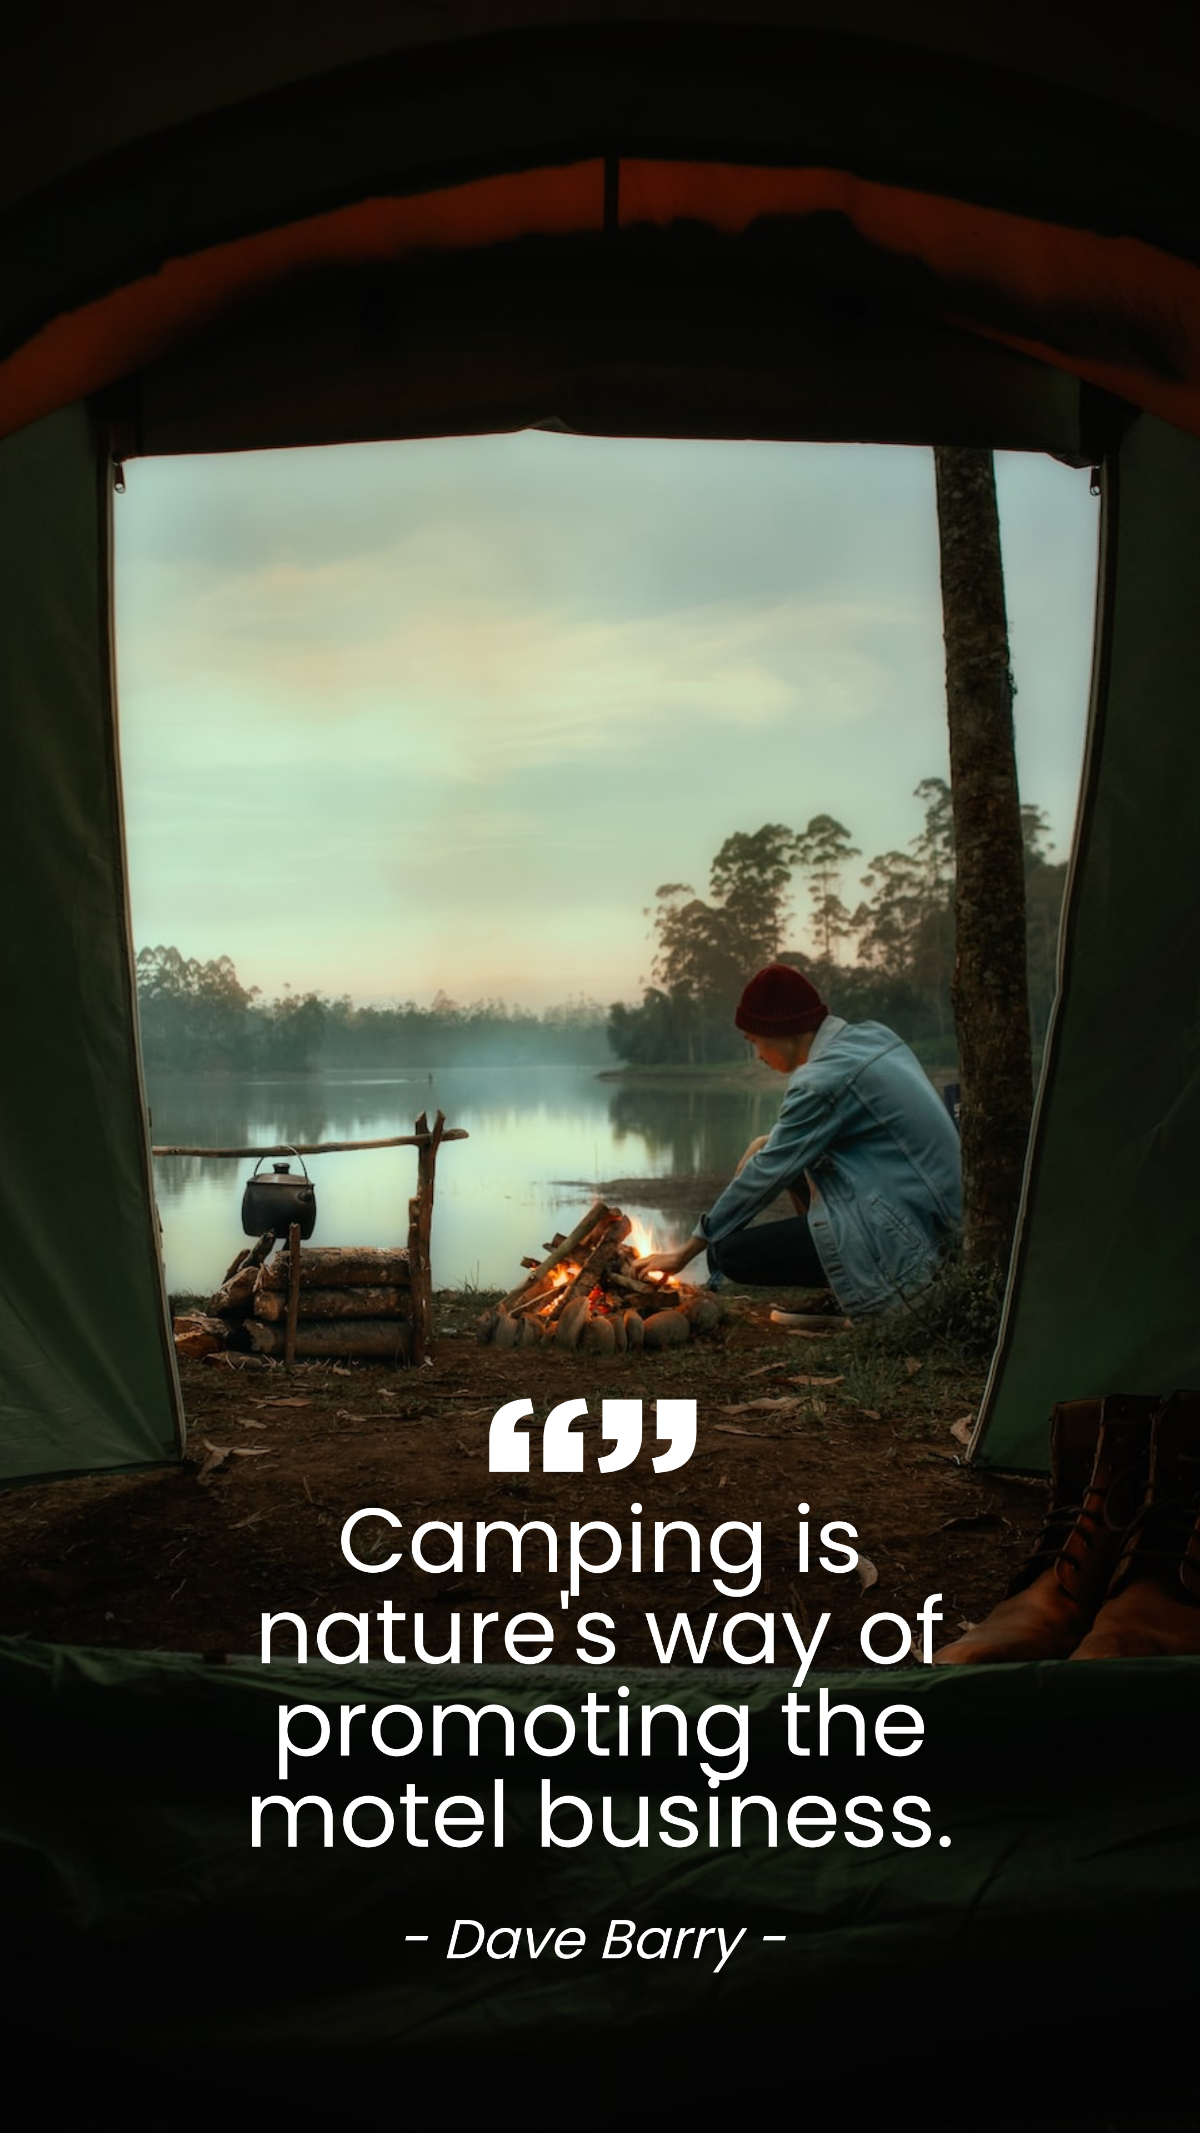 Dave Barry - Camping is nature's way of promoting the motel business.